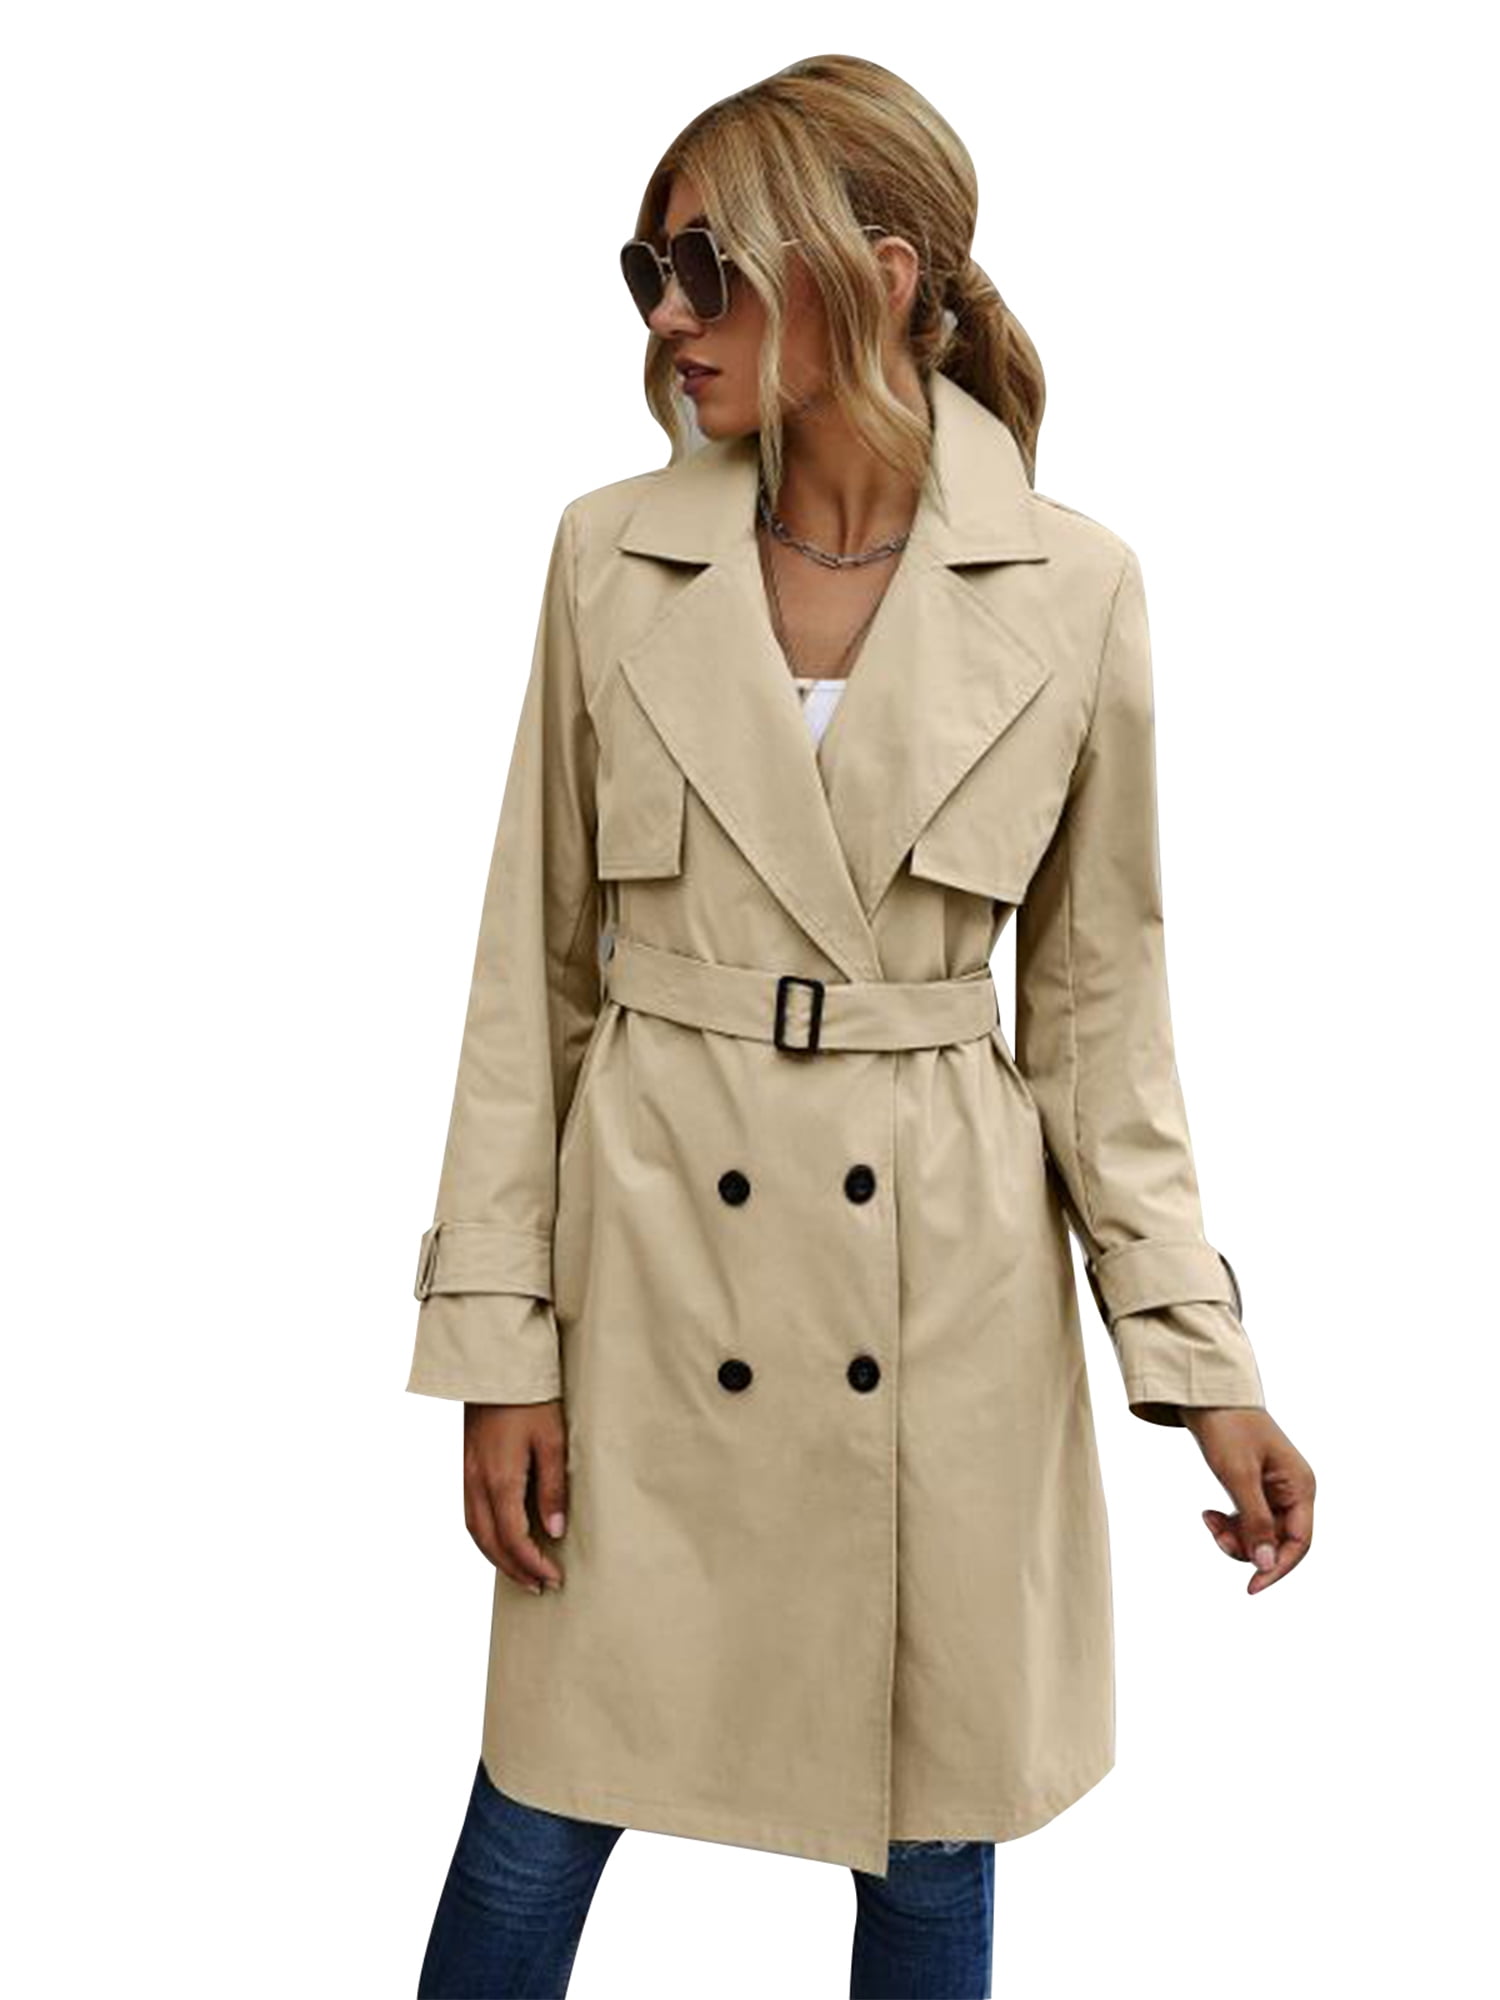 Women Double Breasted Belt Lapel Slim Fit Trench Coat Mid Long Lace Jacket New